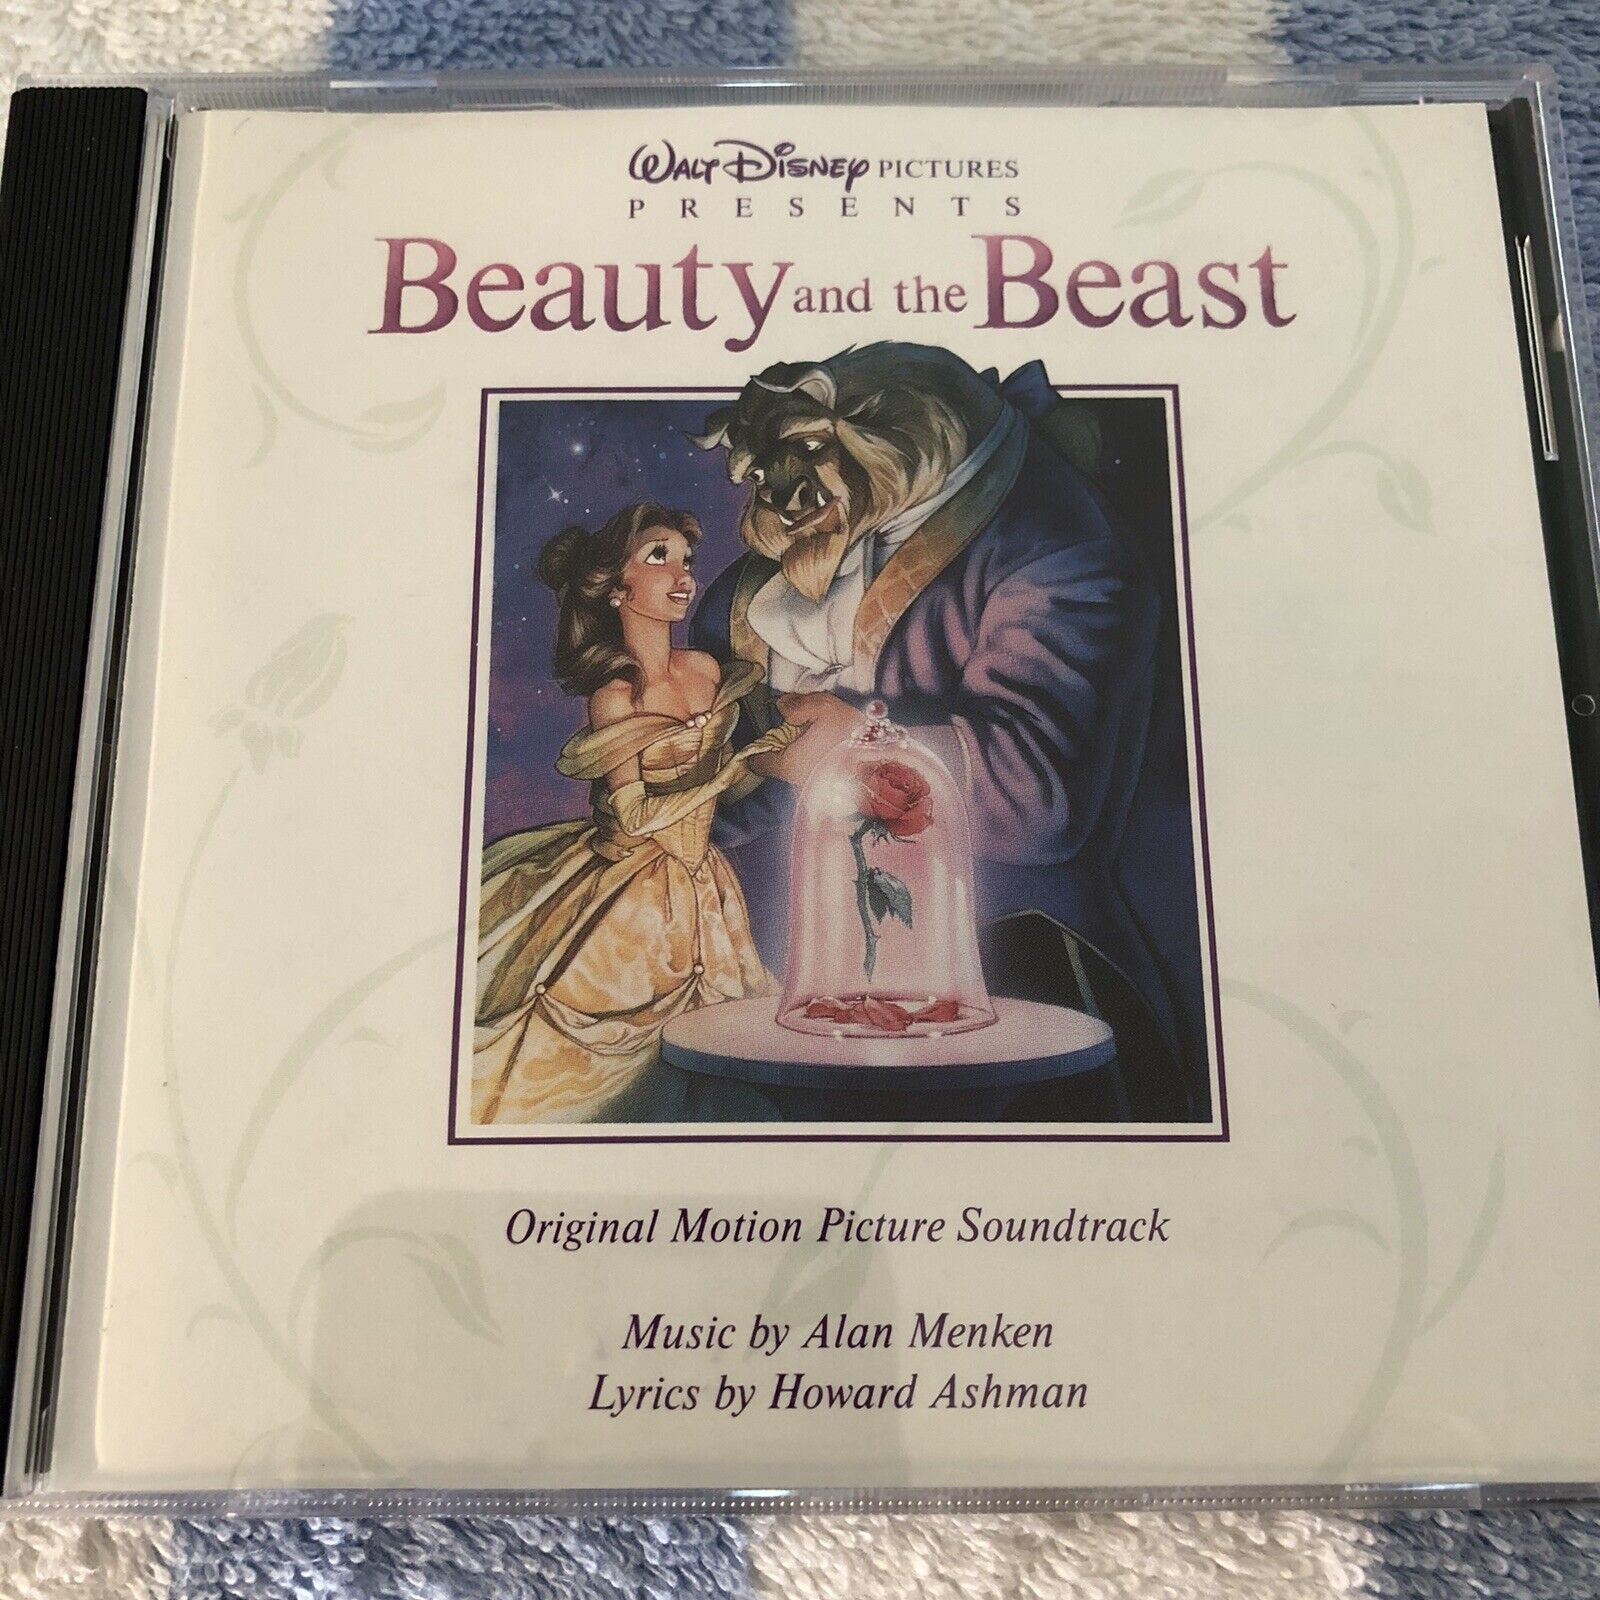 Disney\'s Beauty and the Beast Original Motion Picture Soundtrack CD - Pre-Owned